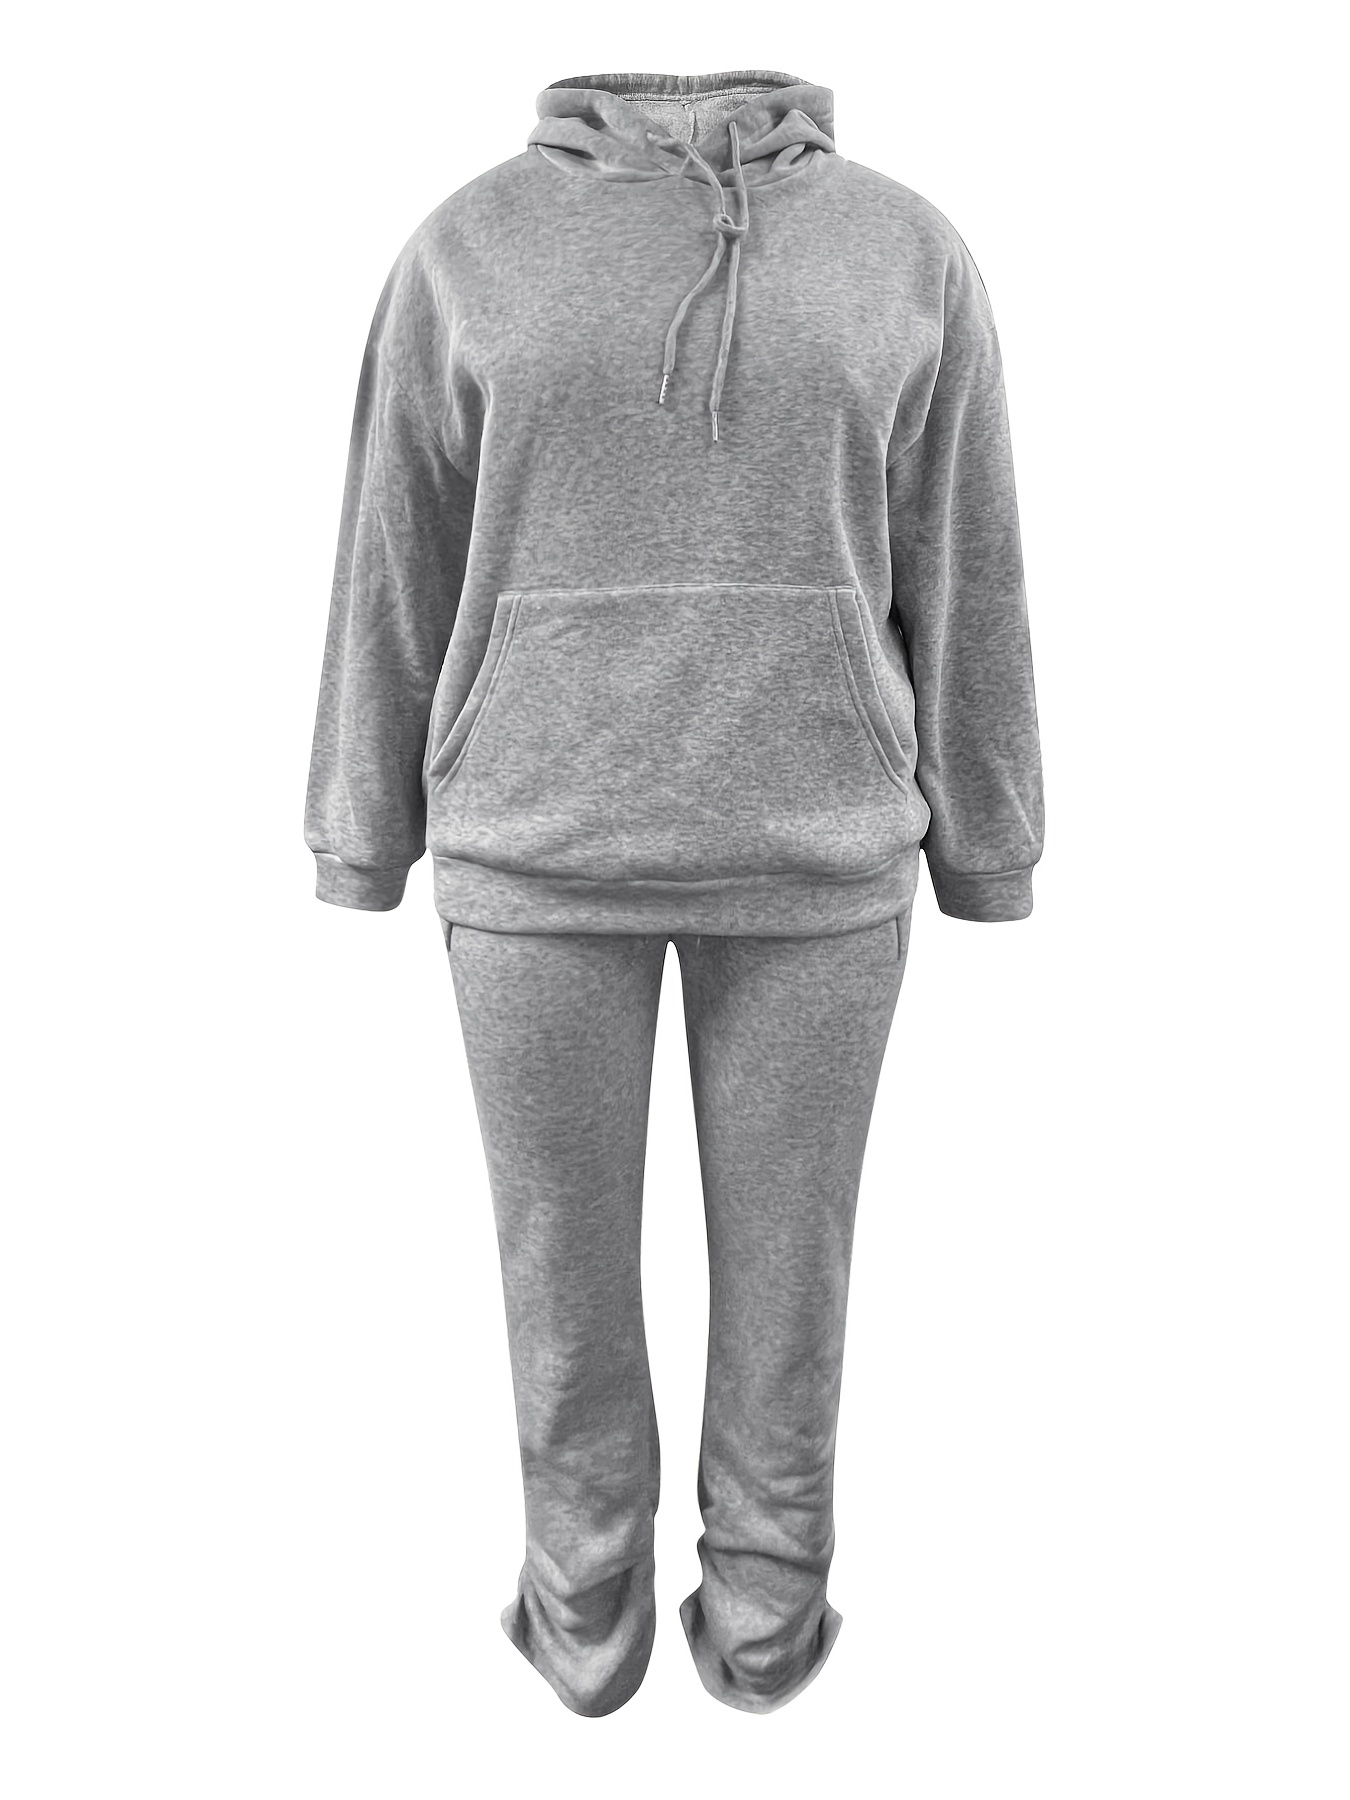 Sayhi Women's Sweatsuit Solid Pants Long Sleeve Hoodies Two Piece Outfits  Plus Size Loungewear Casual Summer Tracksuit Sets Grey S 